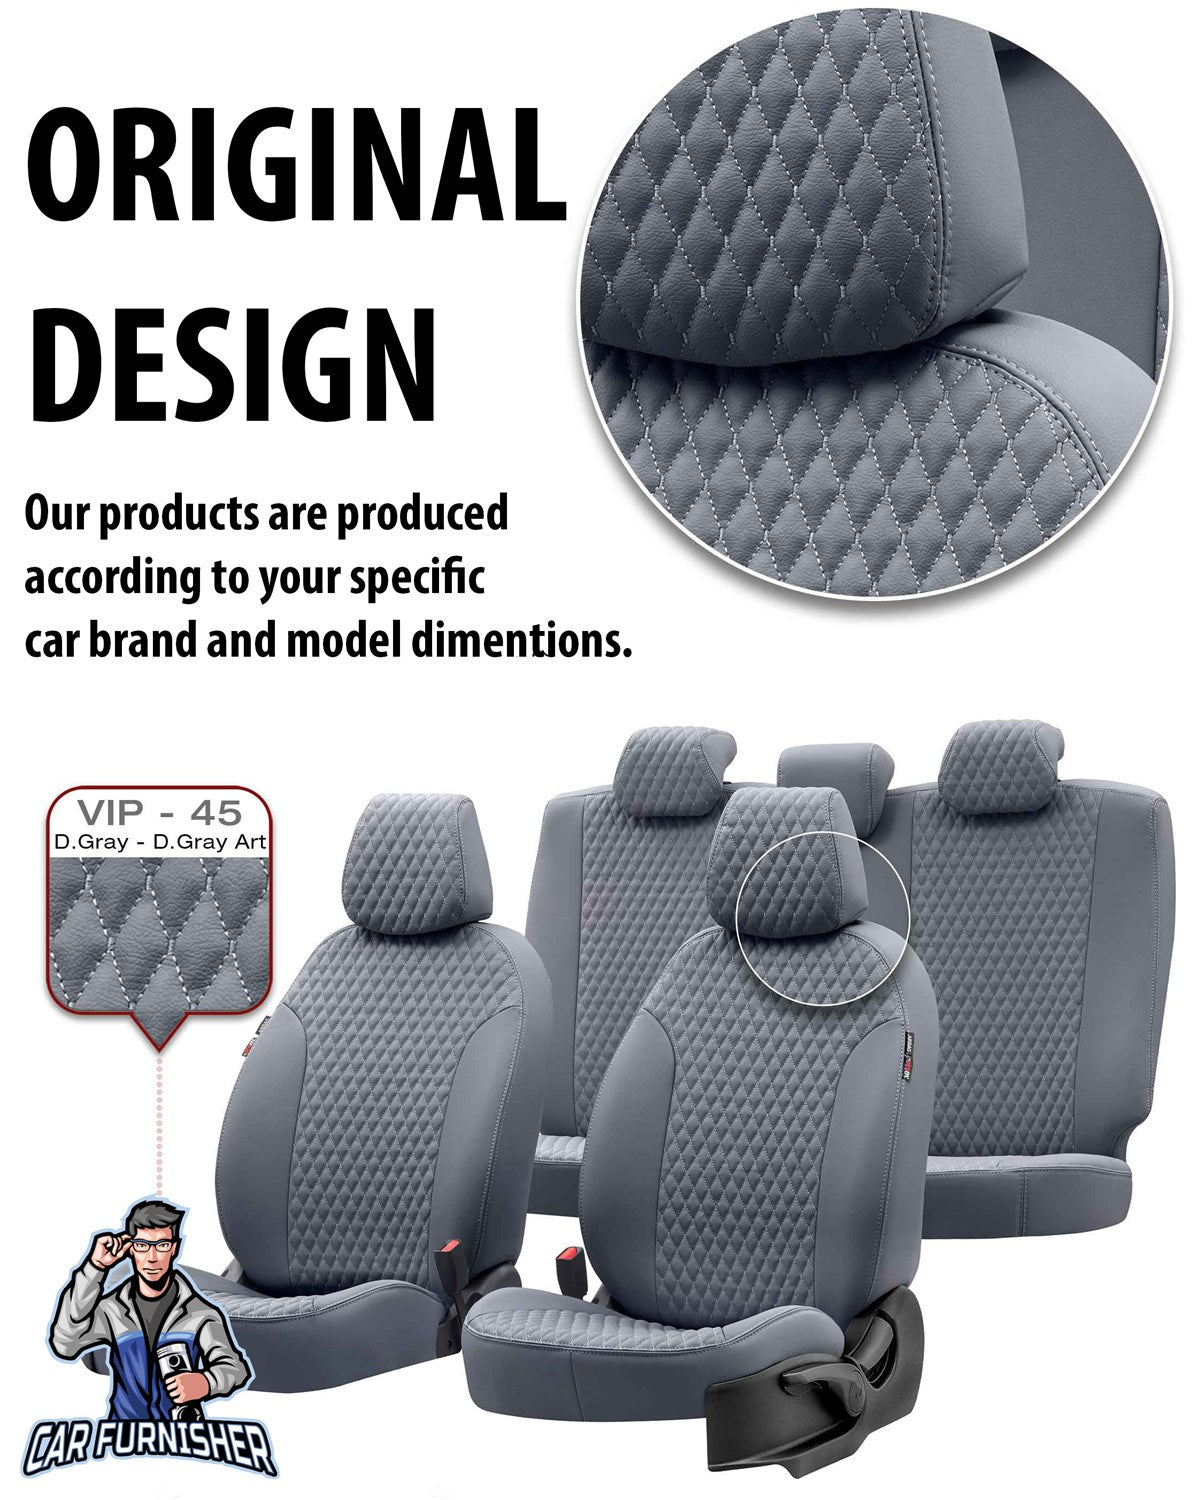 Toyota Hilux Seat Cover Amsterdam Leather Design Black Leather